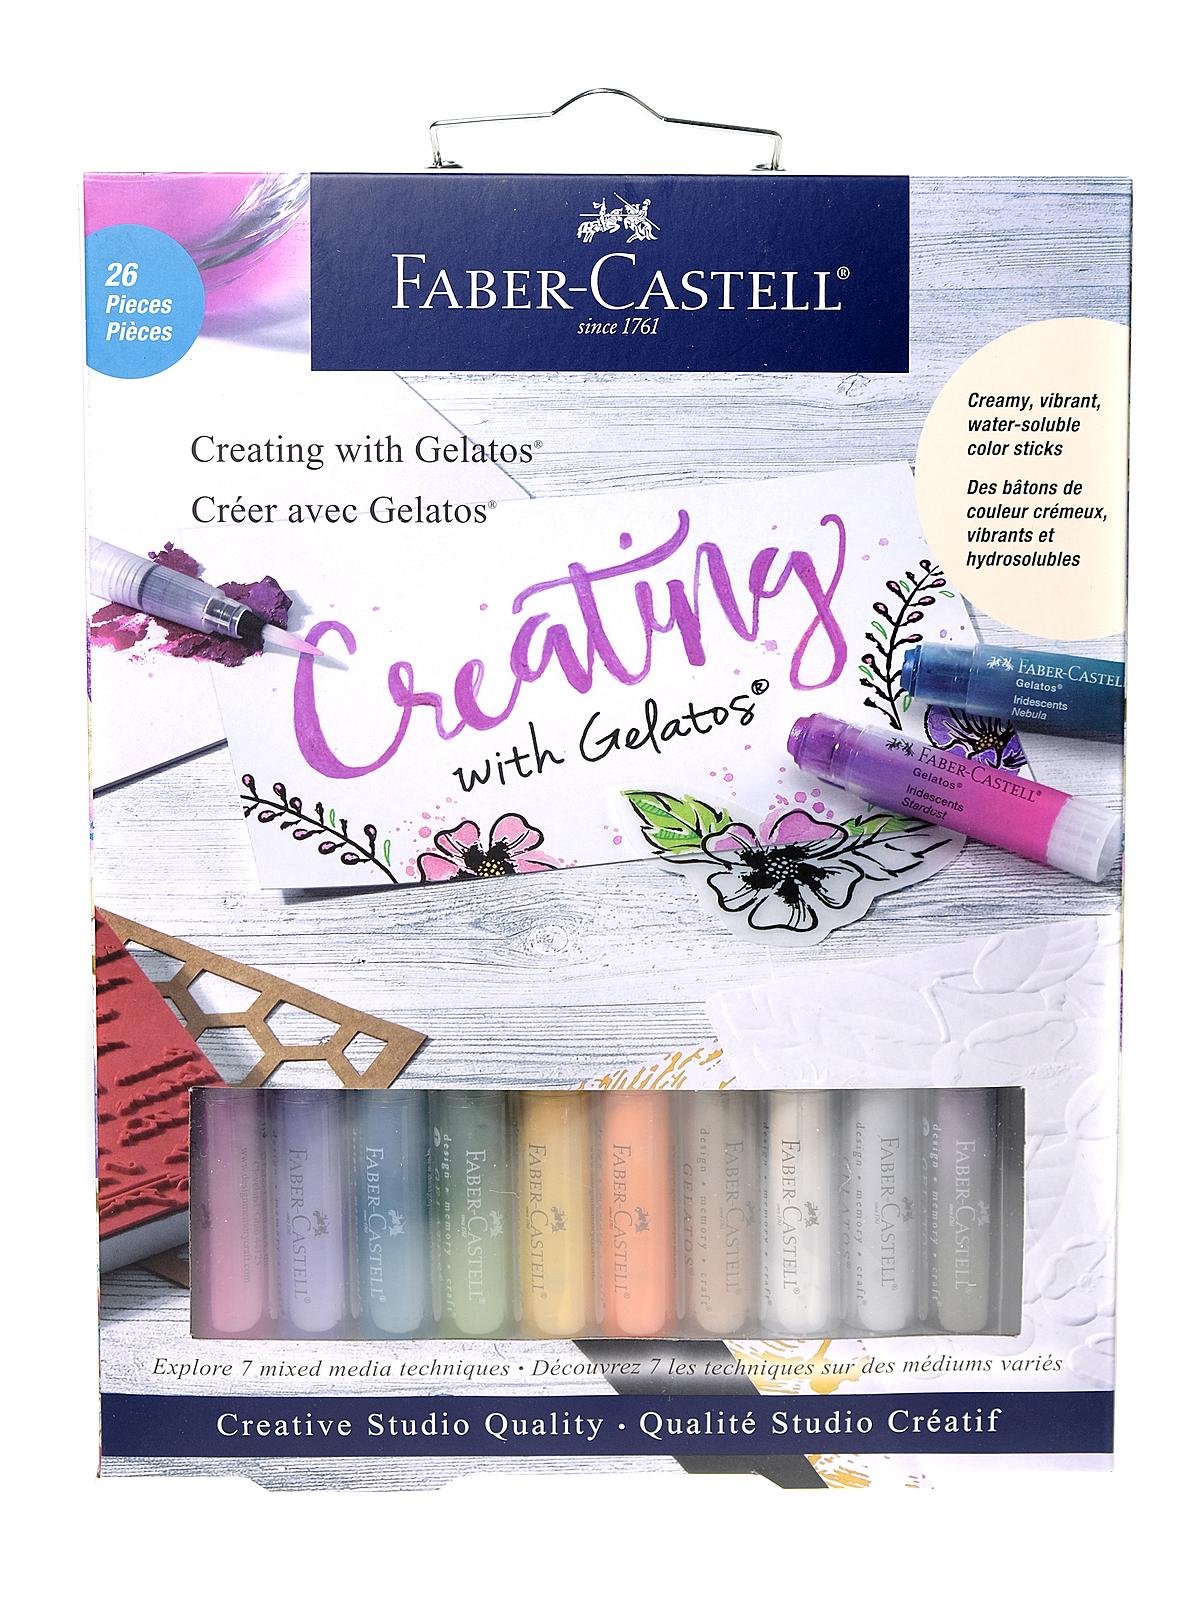 Faber-Castell - Creating with Gelatos